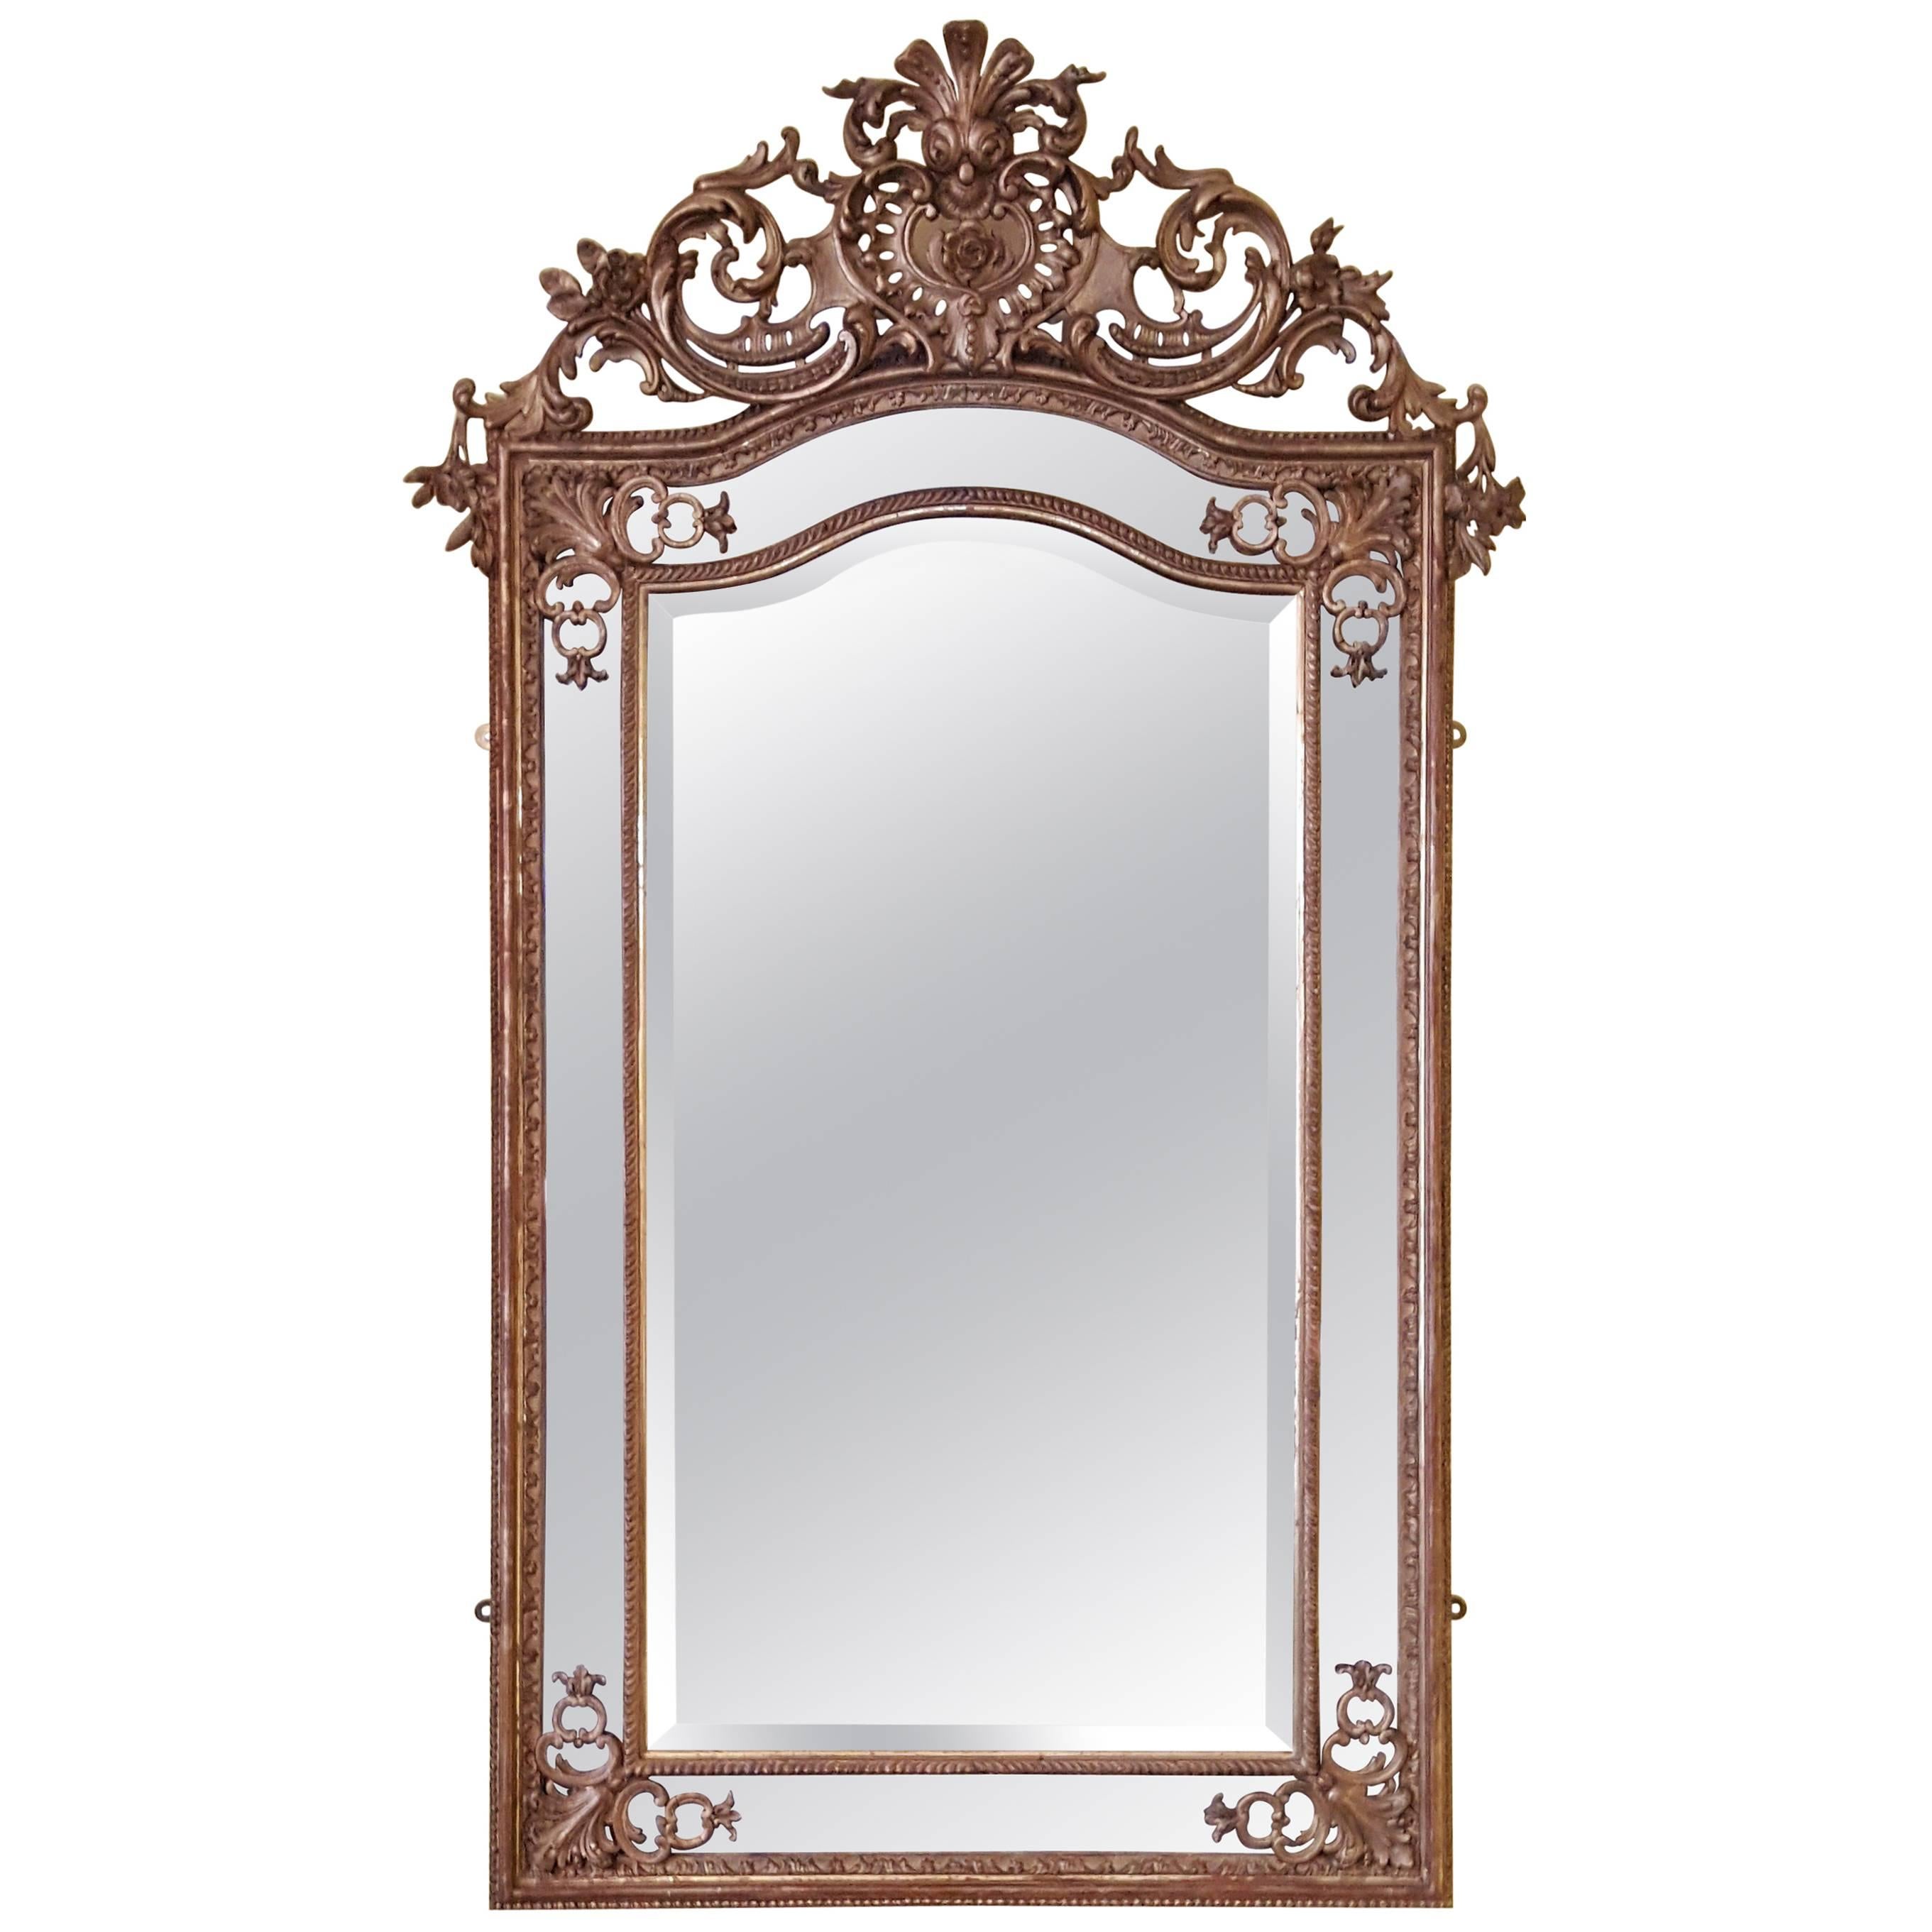 High Victorian Giltwood and Gesso Framed Mirror